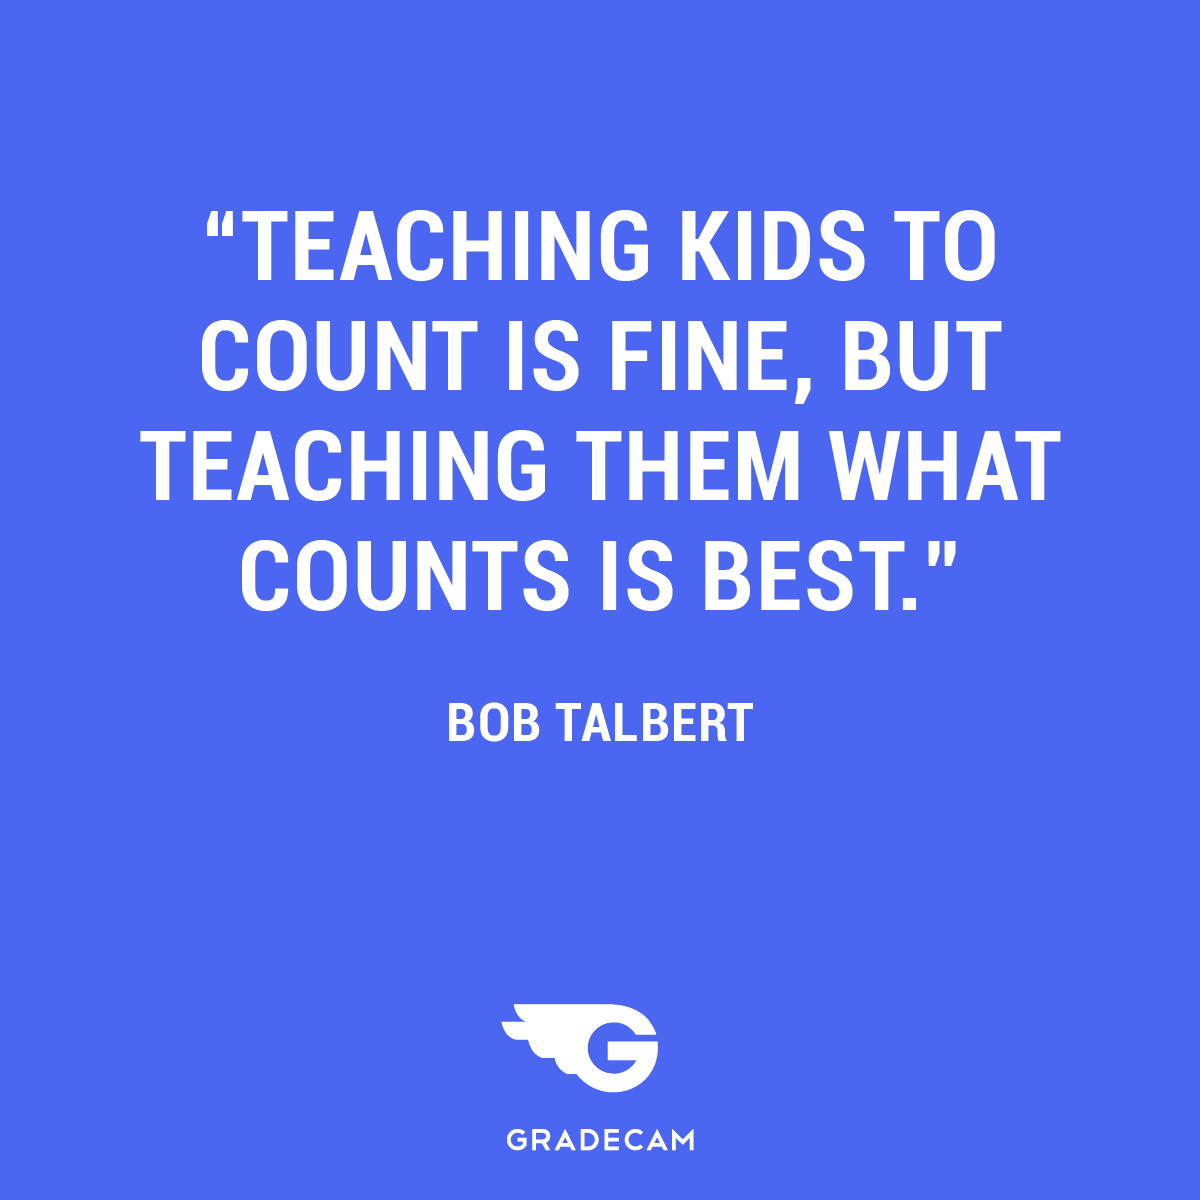 teaching kids to count is fine, but teaching them what counts is best. bob talbert